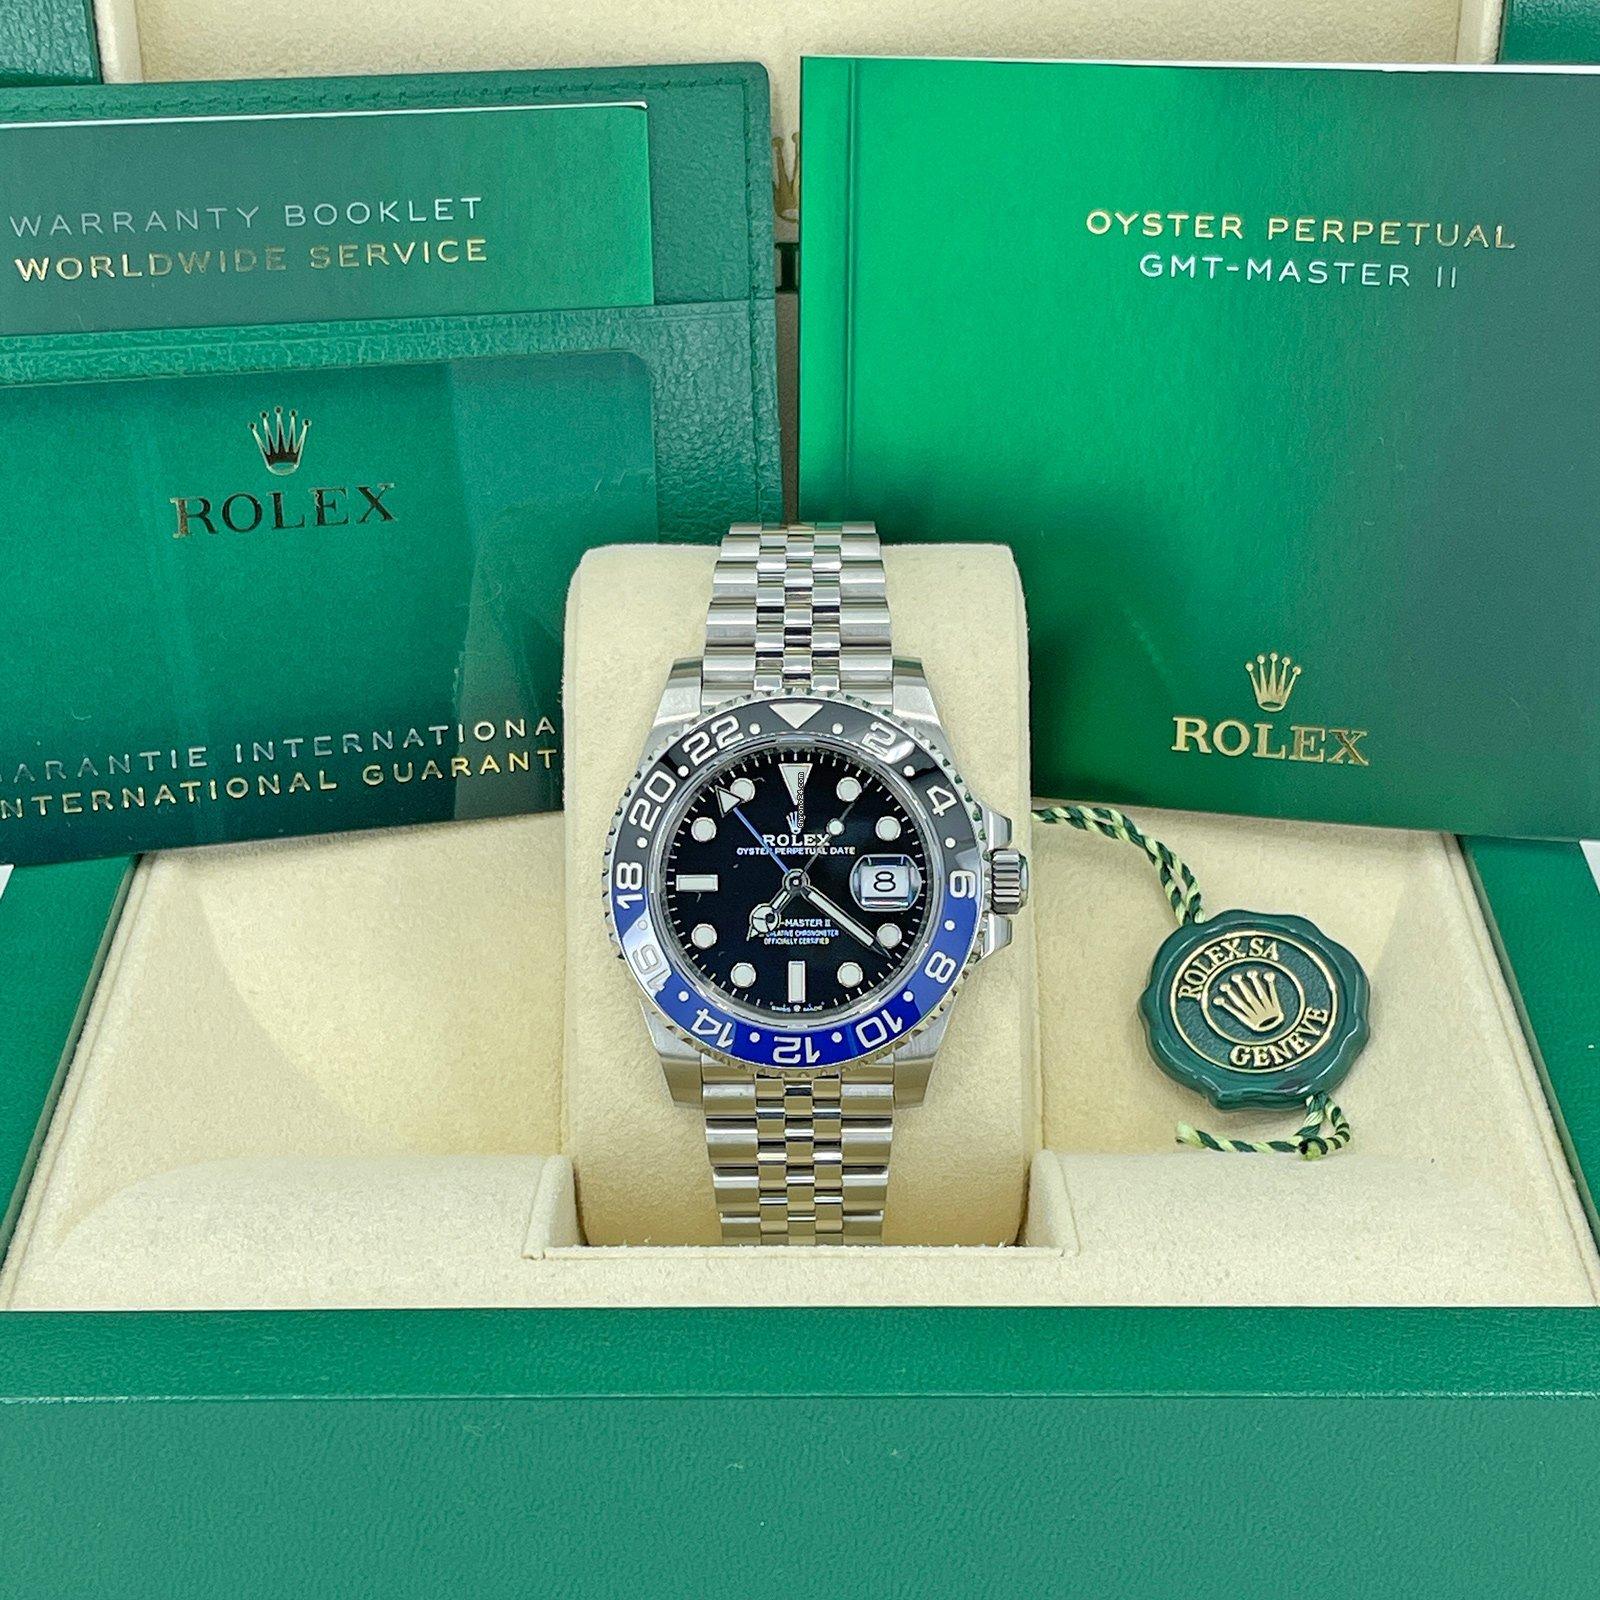 The watch is unworn, complete set of original Rolex Box and Warranty card dated 2022.
This watch is unworn and comes with an original Rolex watch box, Manual and Warranty booklets, green COSC tag and Rolex Warranty Card. Neither plastic Bezel